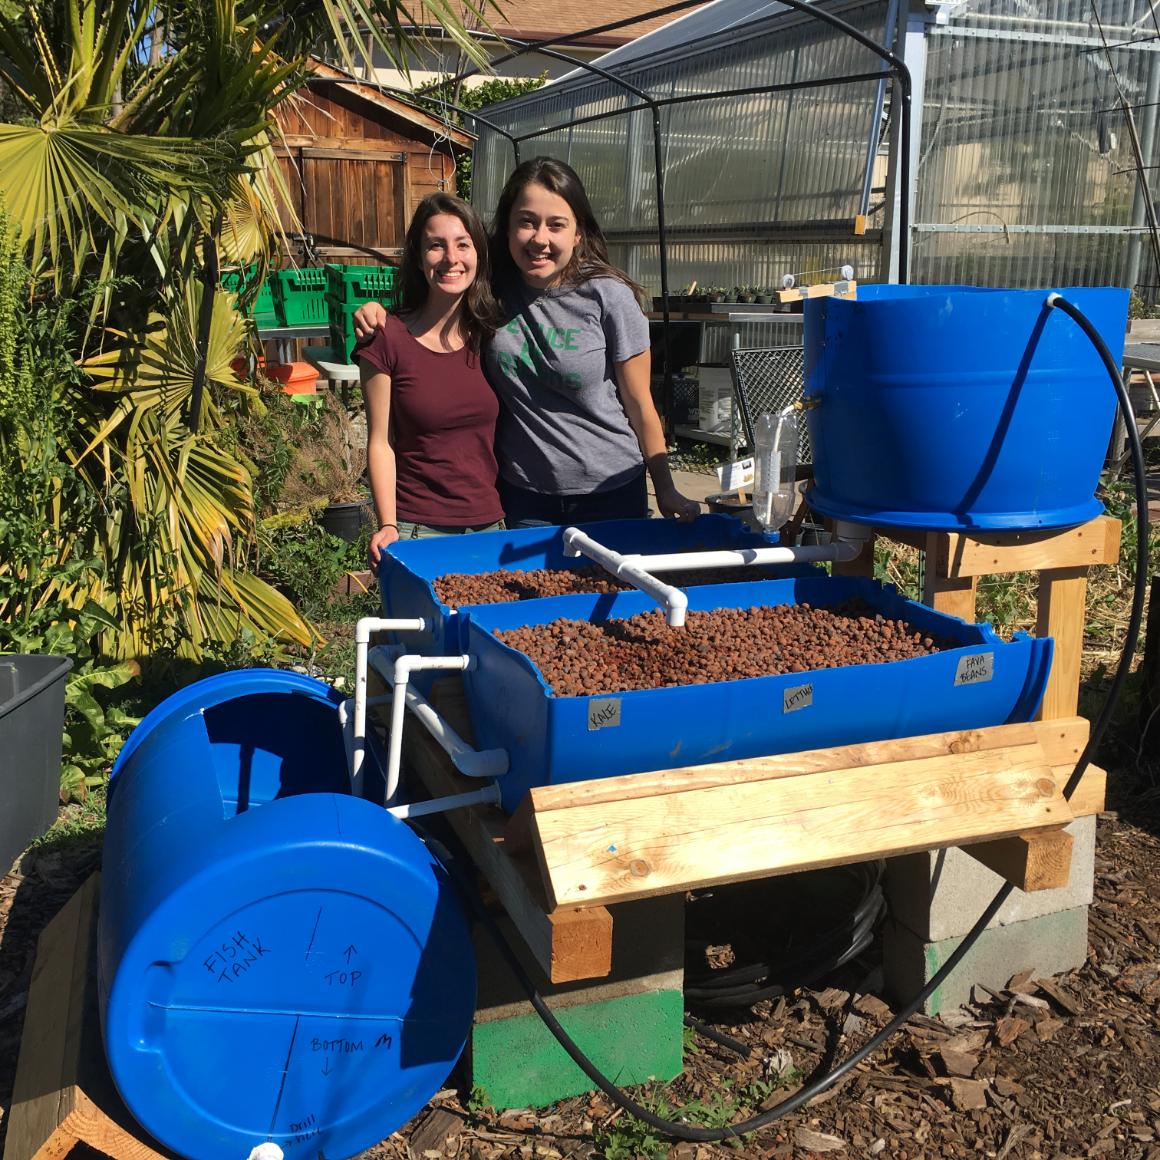 Cristina Whitworth and Lauren Oliver designed and built an aquaponic farming system for women in Uganda. image link to story